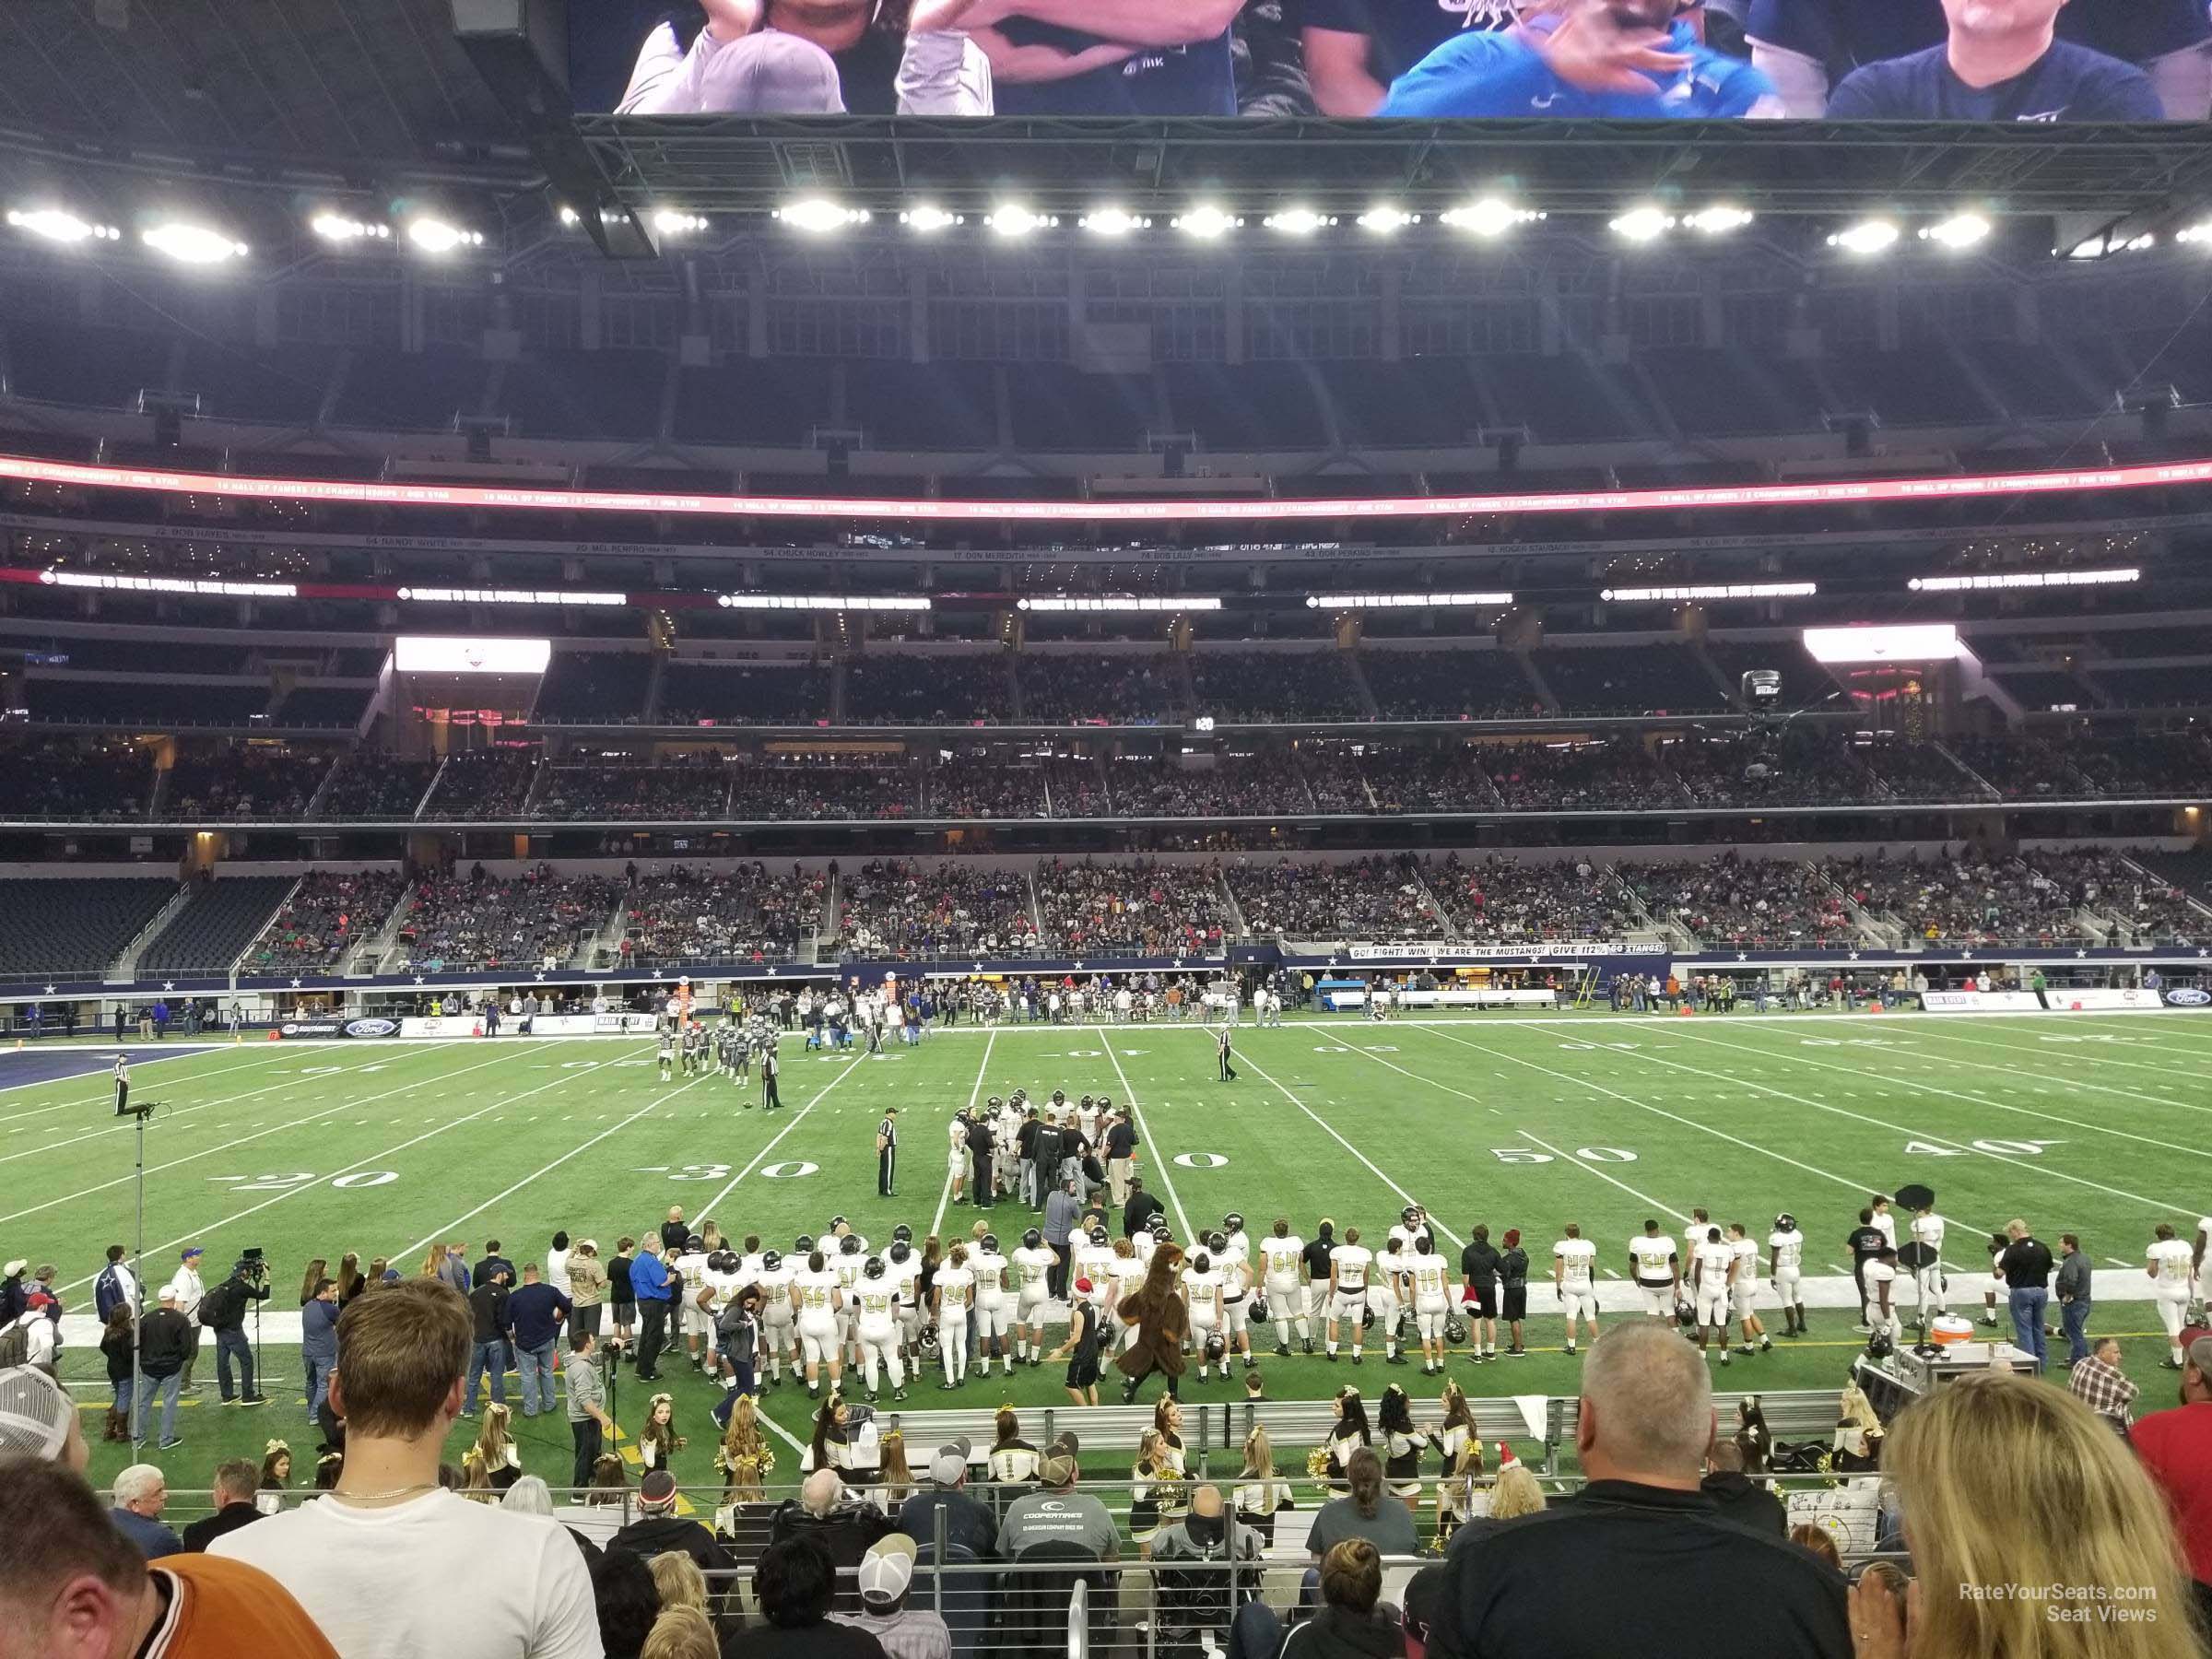 section c136, row 12 seat view  for football - at&t stadium (cowboys stadium)